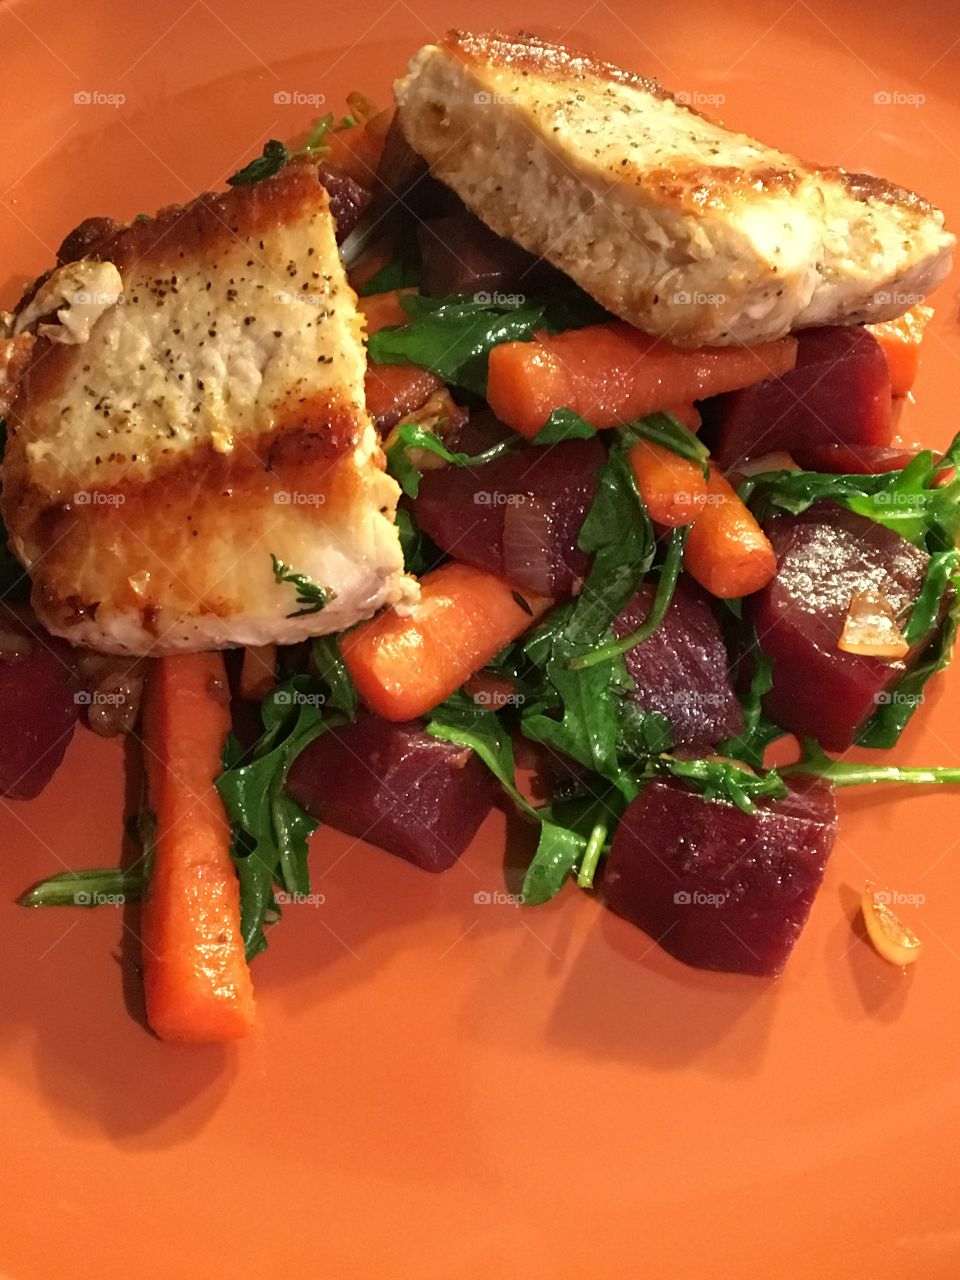 Blue Apron: Pork Chops with a Warm Red Beet, Carrot, and Arugala salad